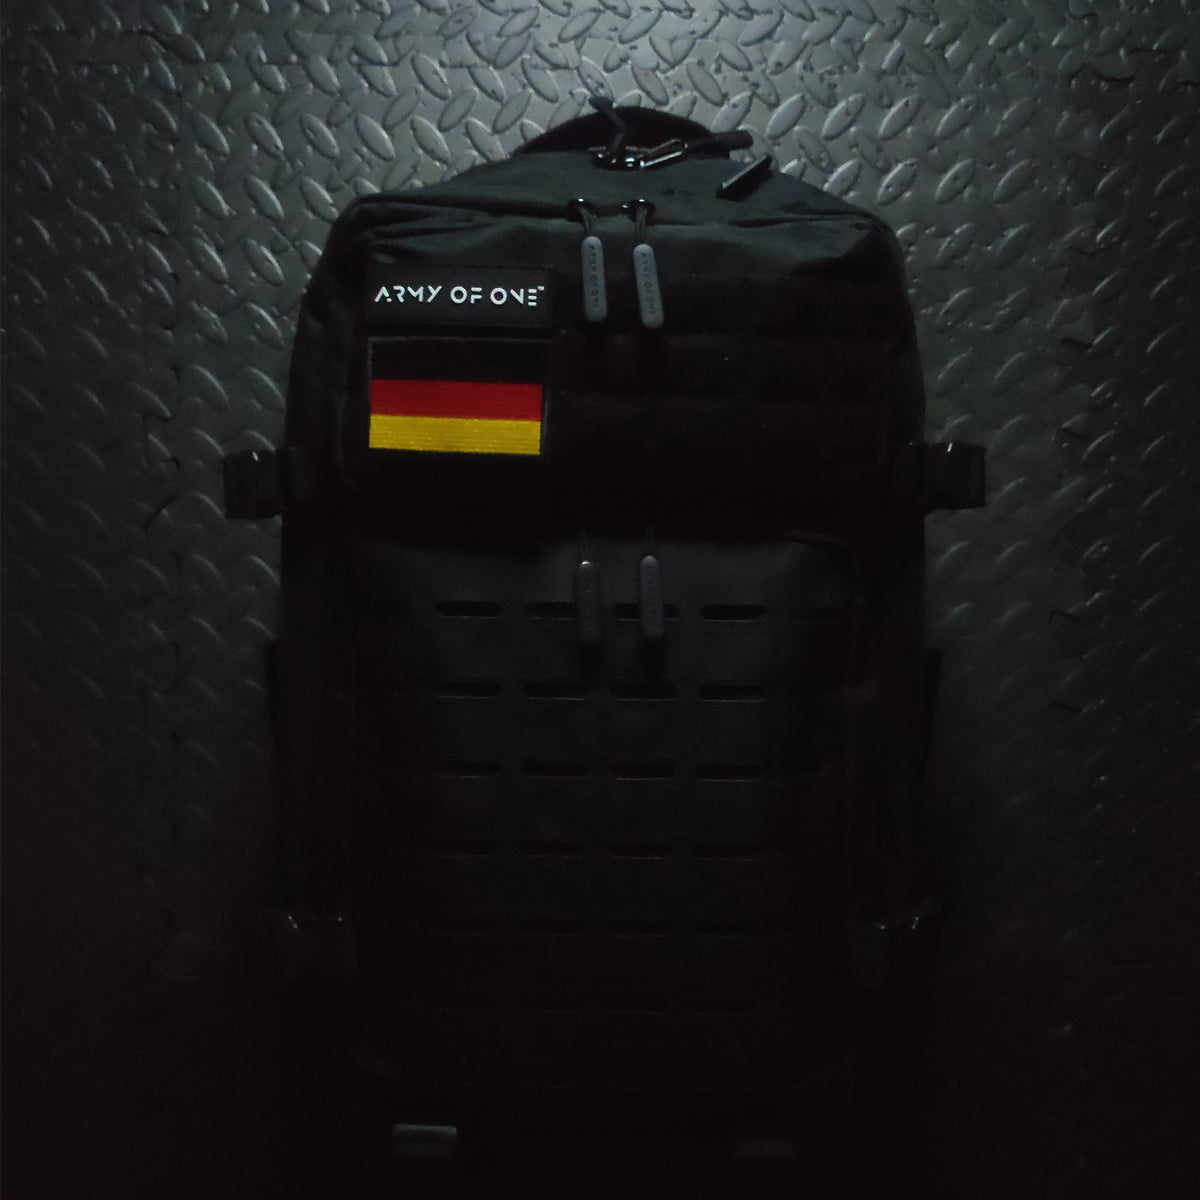 BLACK 45 LITRE ARMY OF ONE BACKPACK WITH VELCRO GERMAN PATCH ATTACHED